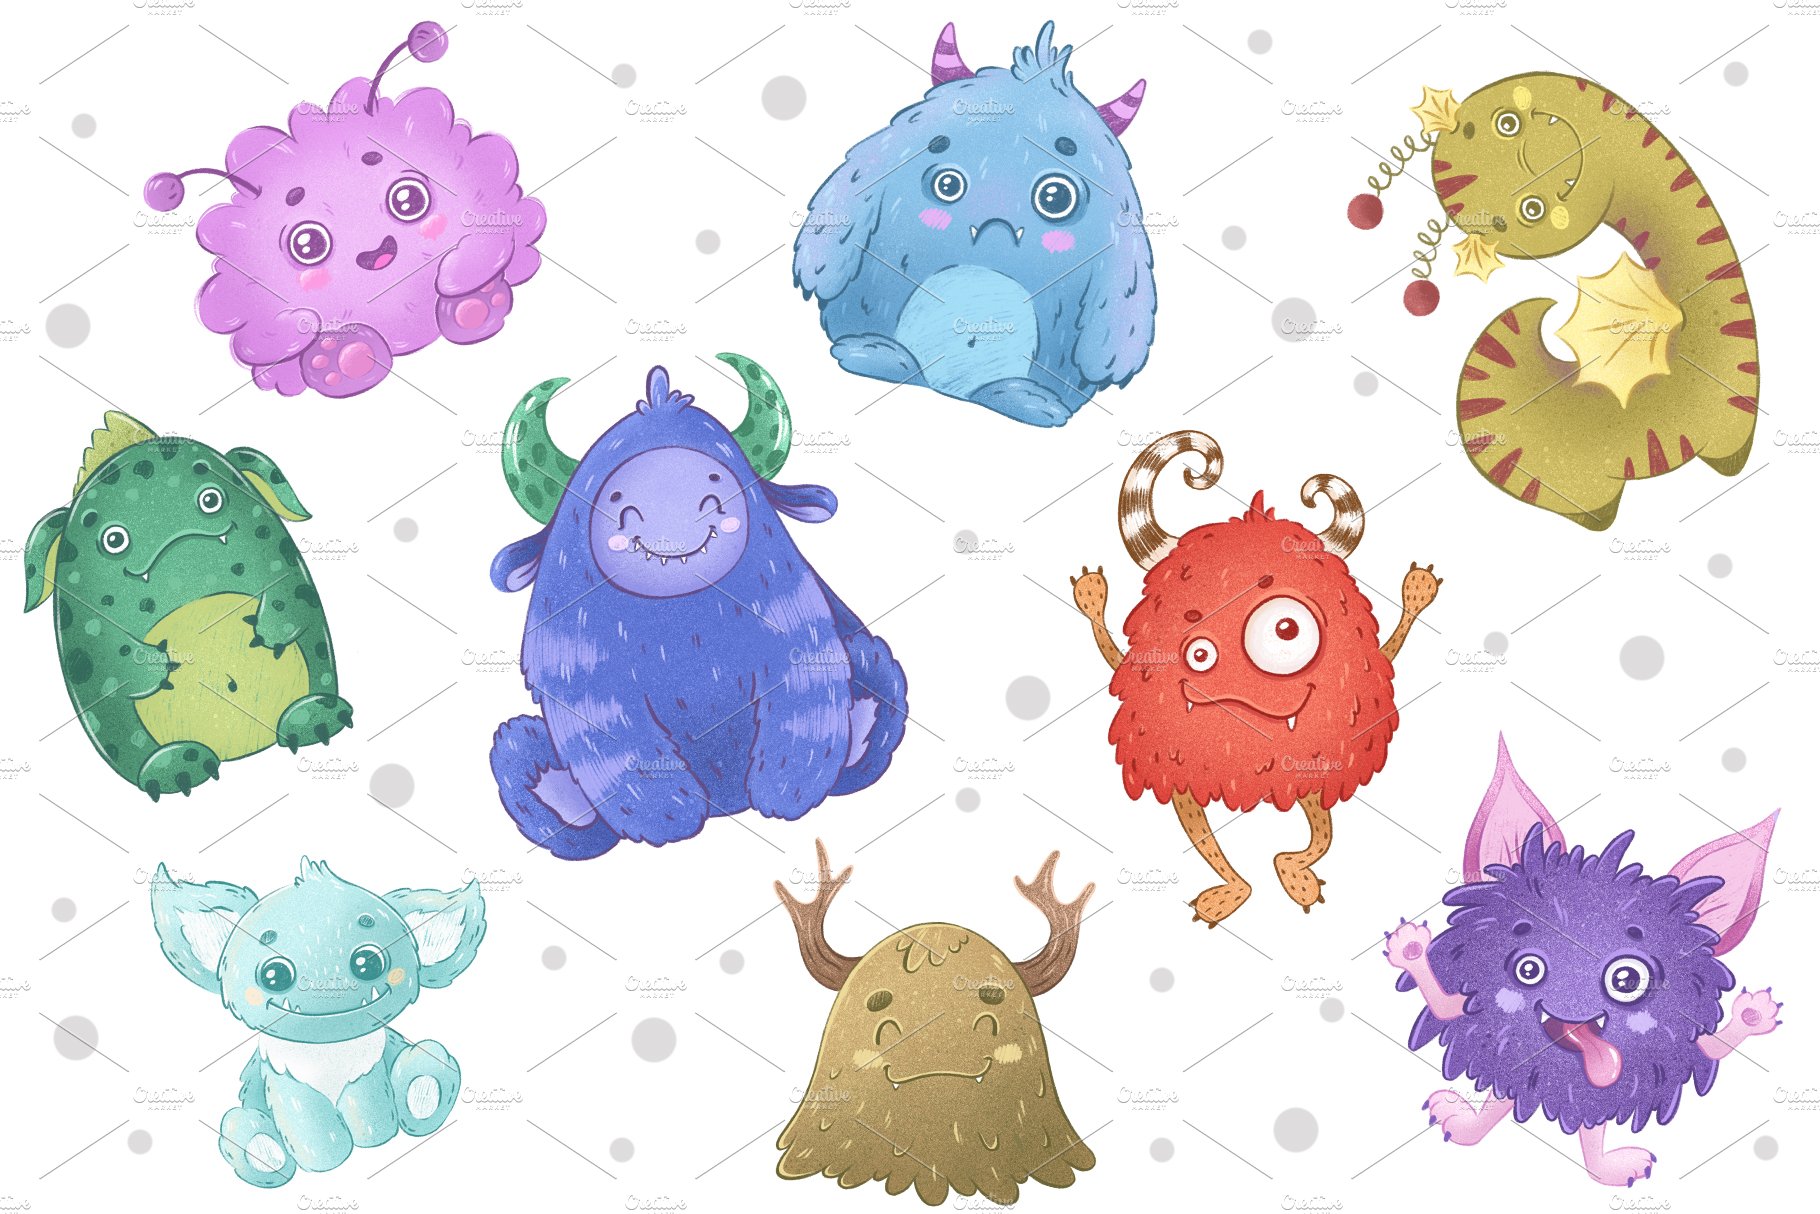 Cute monsters preview image.